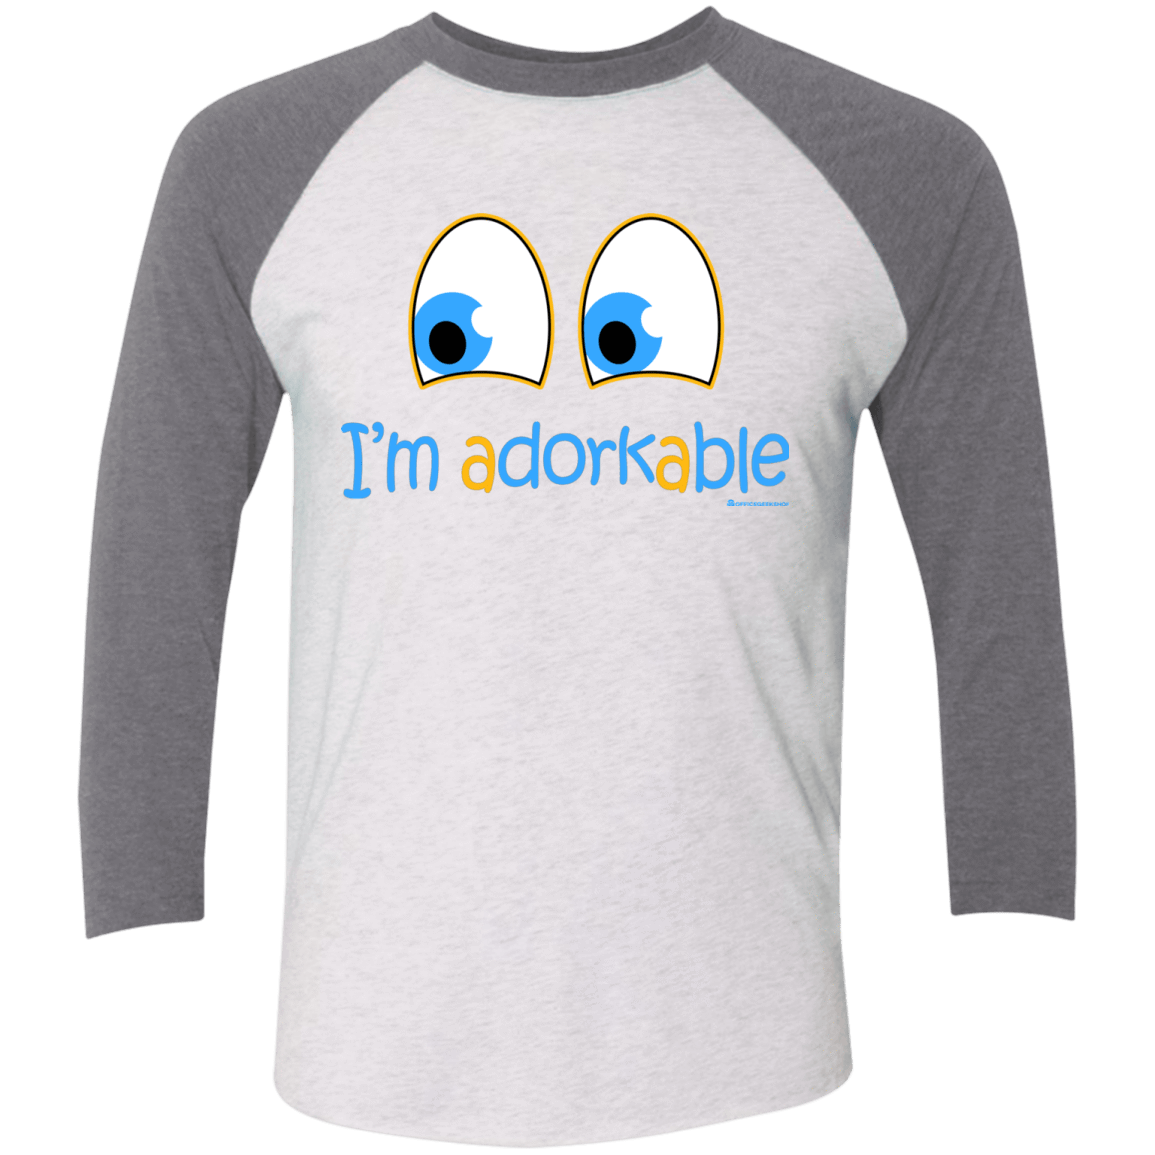 T-Shirts Heather White/Premium Heather / X-Small I Am Adorkable Triblend 3/4 Sleeve